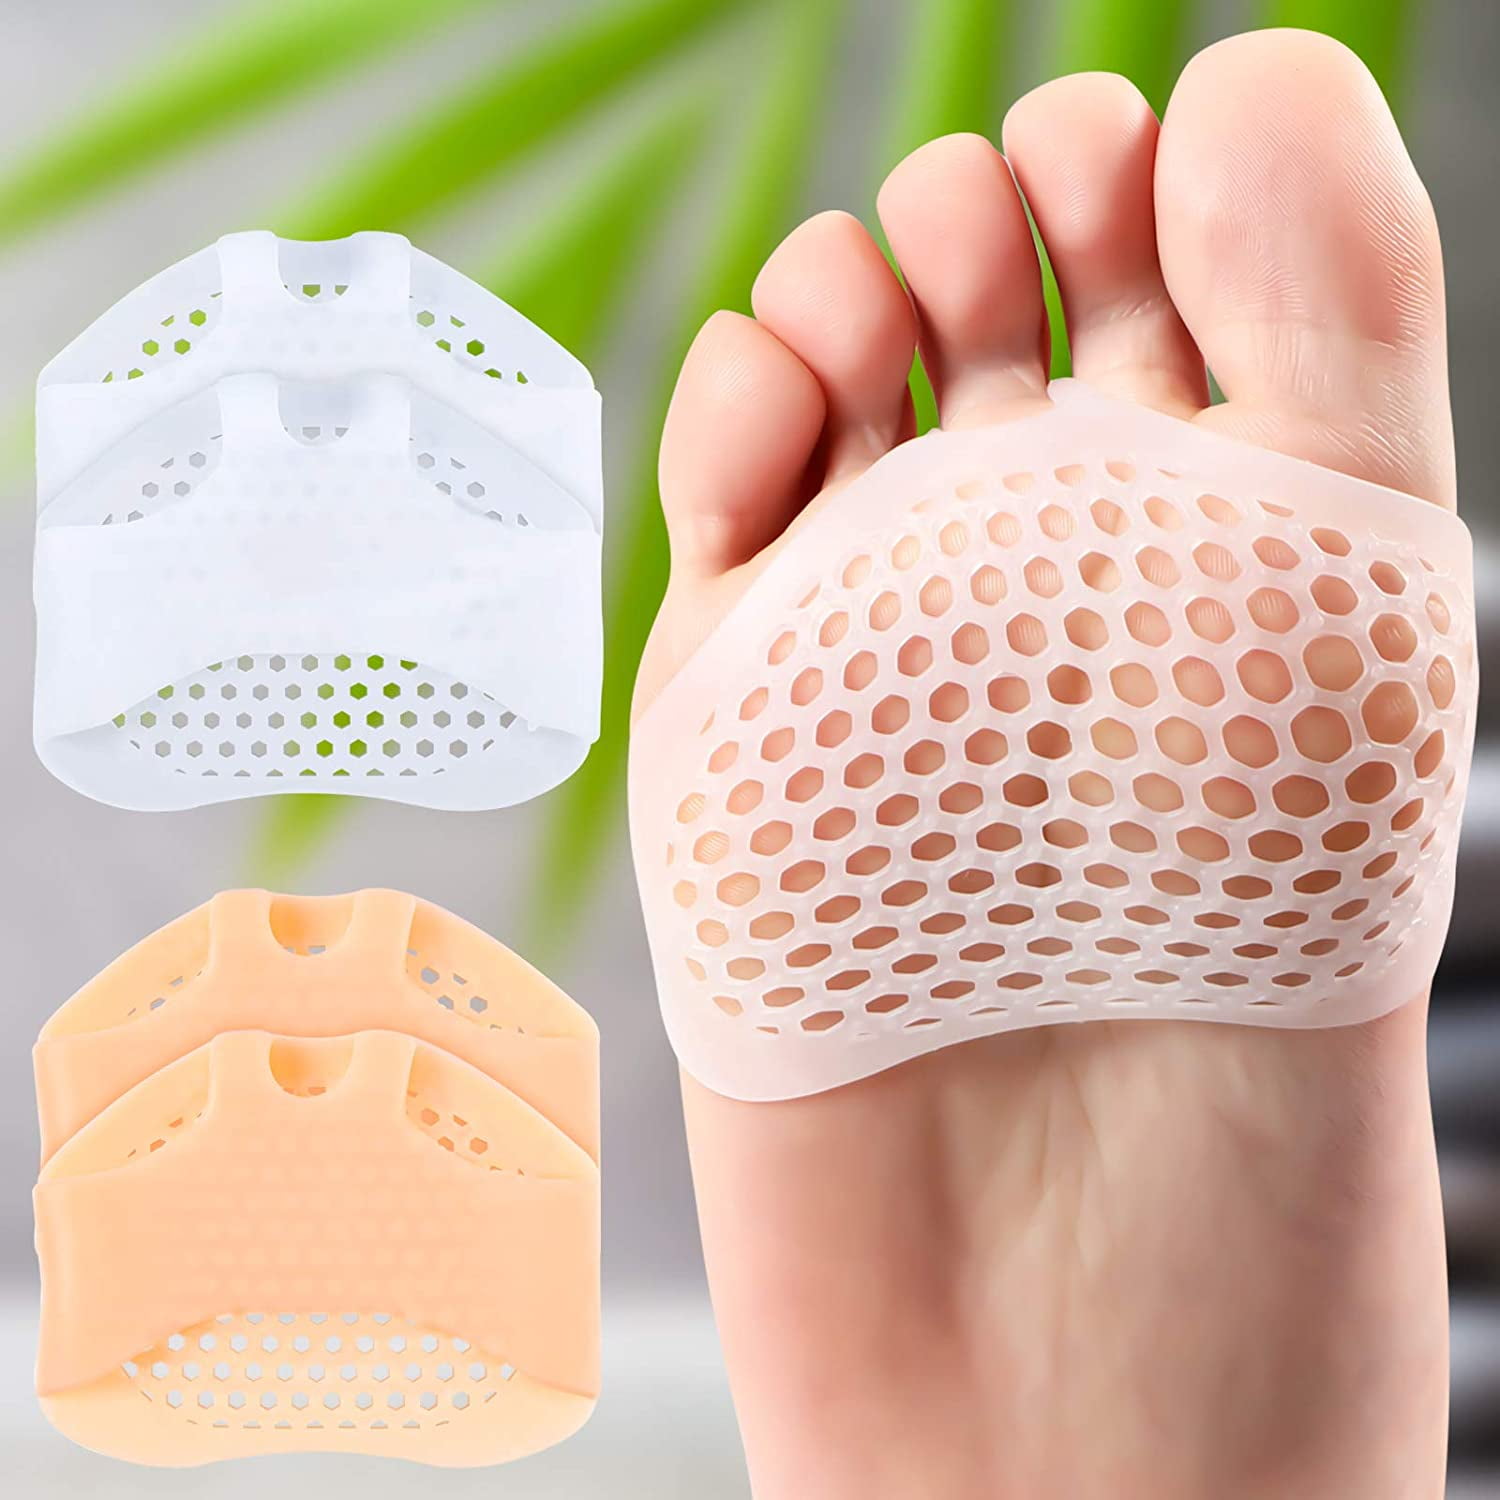 Anti-Pain Sponge Cushion Foot Forefoot Half Yards Foot Pain Cushions Pads Insole 